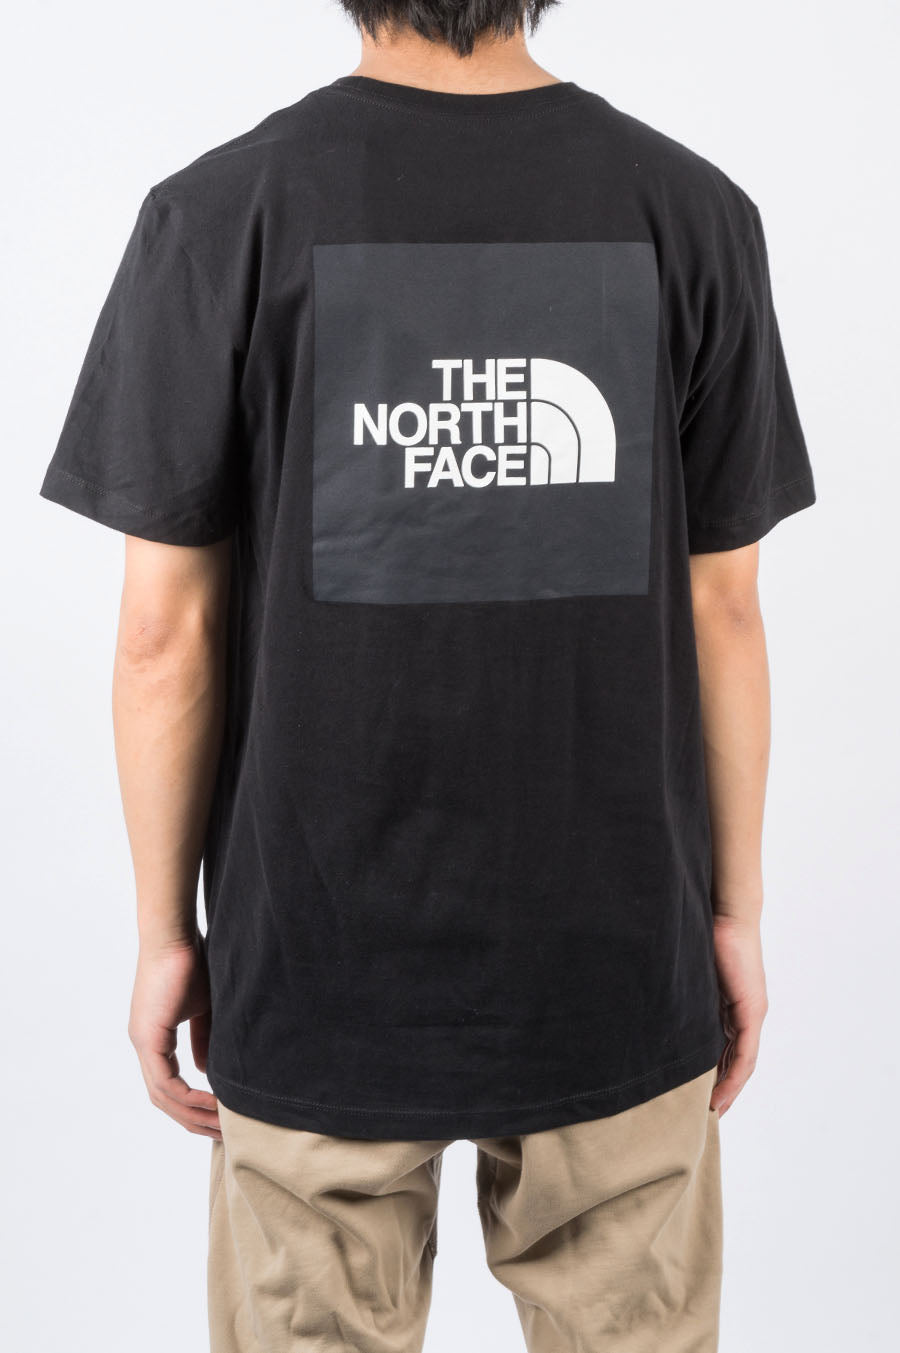 THE NORTH FACE SS BOX TEE BLACK - BLENDS